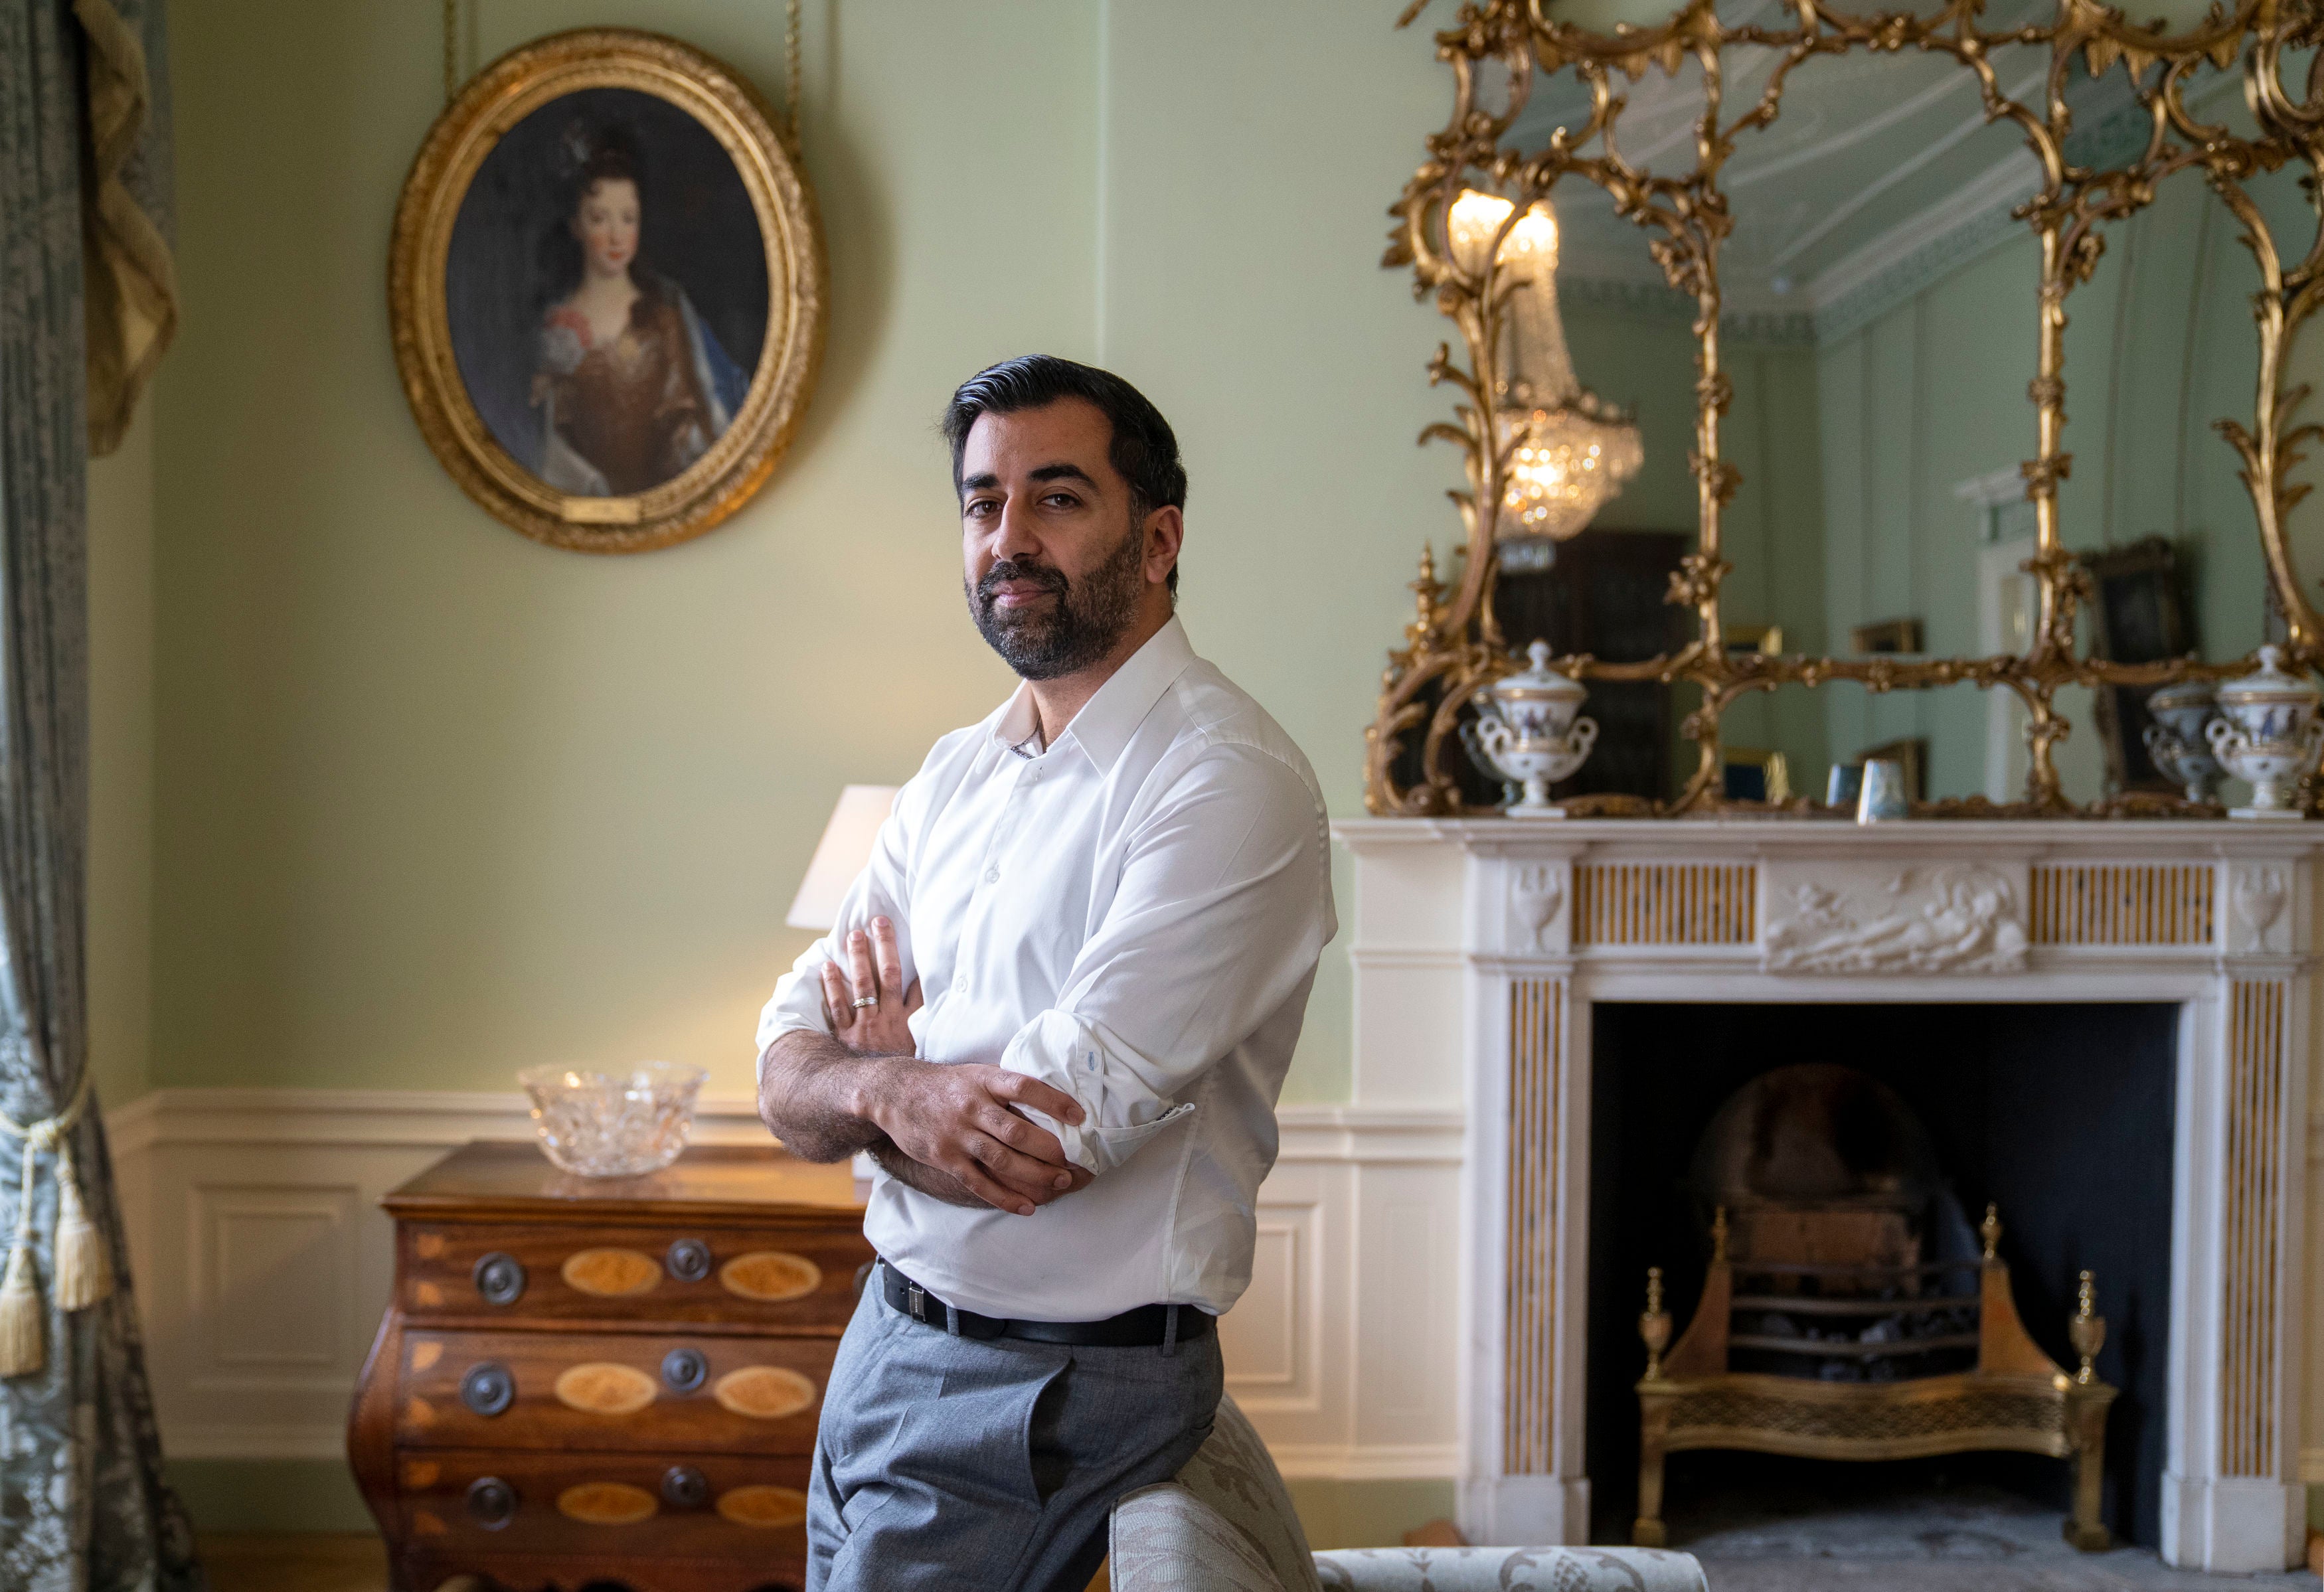 Humza Yousaf, Scotland’s first minister and SNP leader, pictured at Bute House in Edinburgh on Thursday